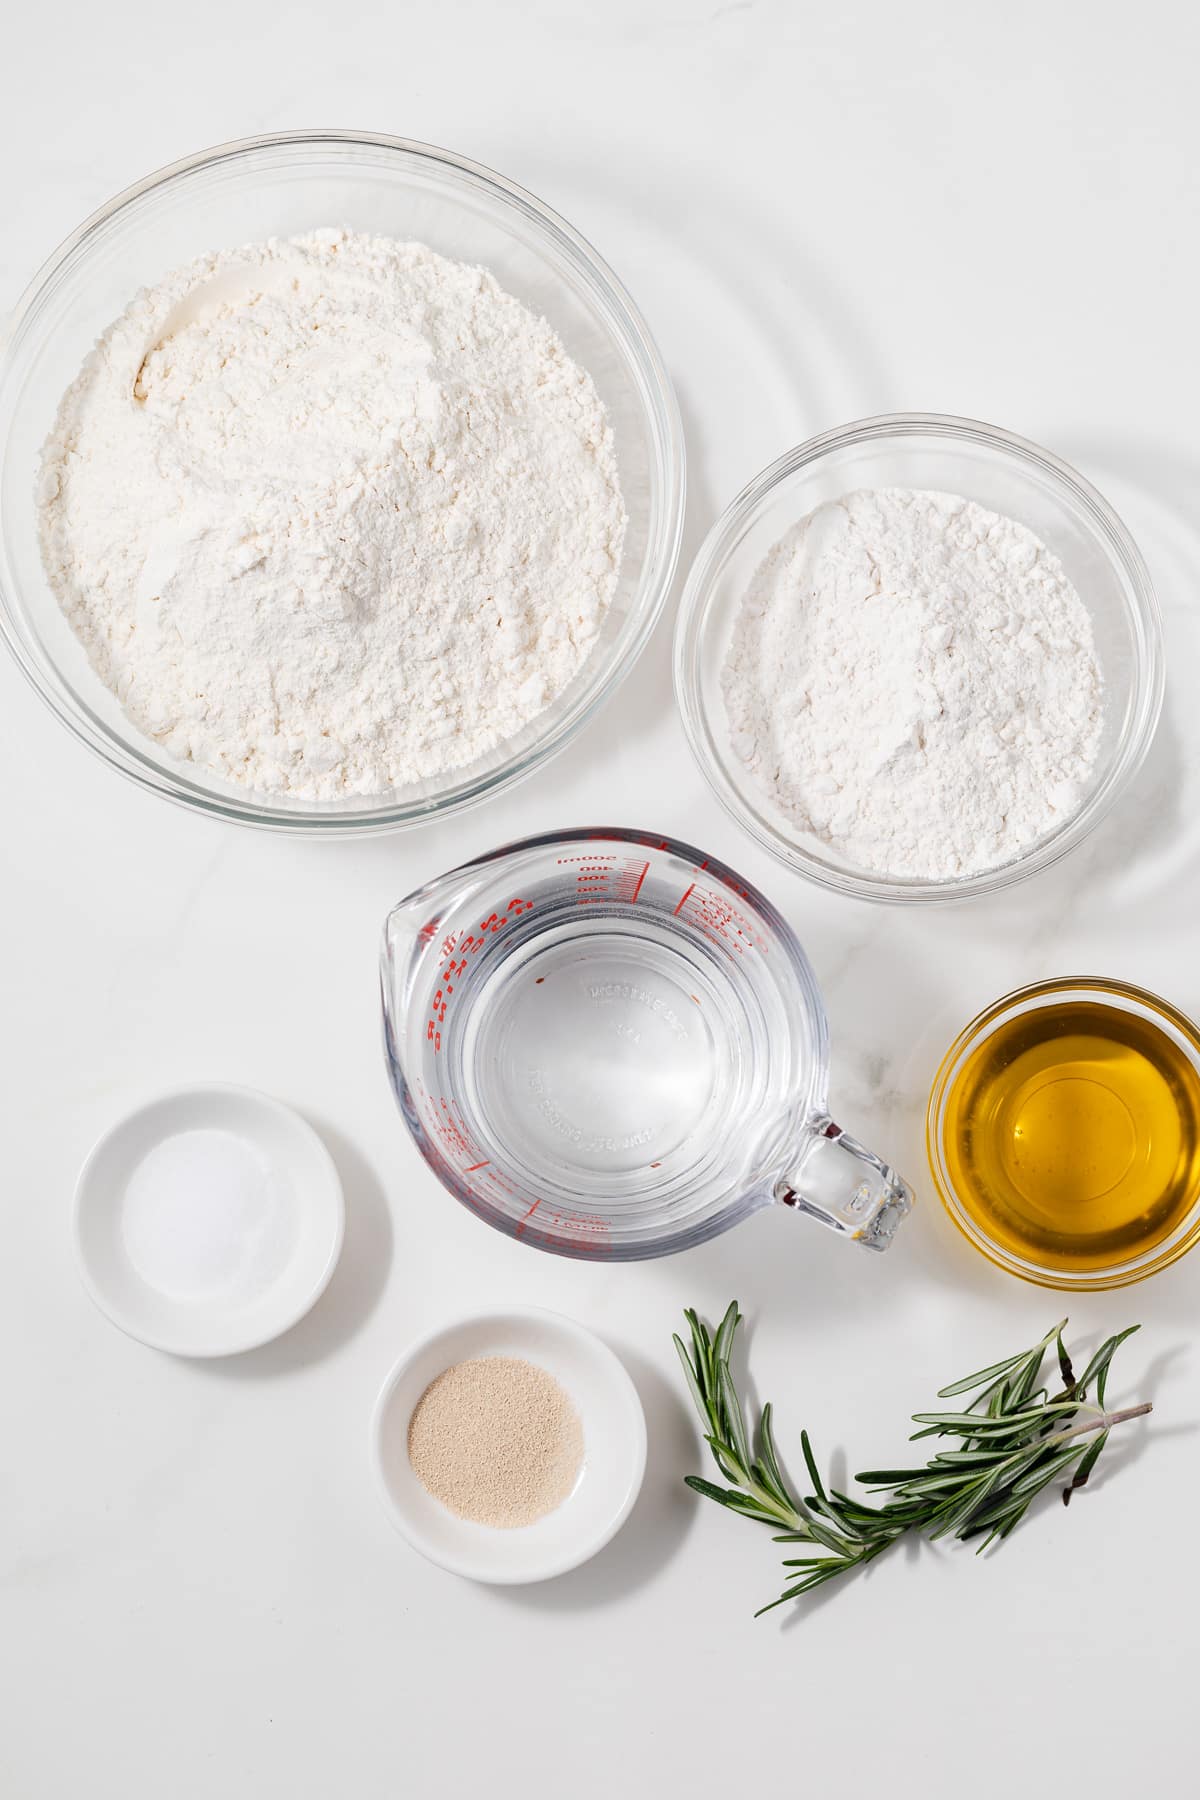 Ingredients for focaccia bread in bowls.